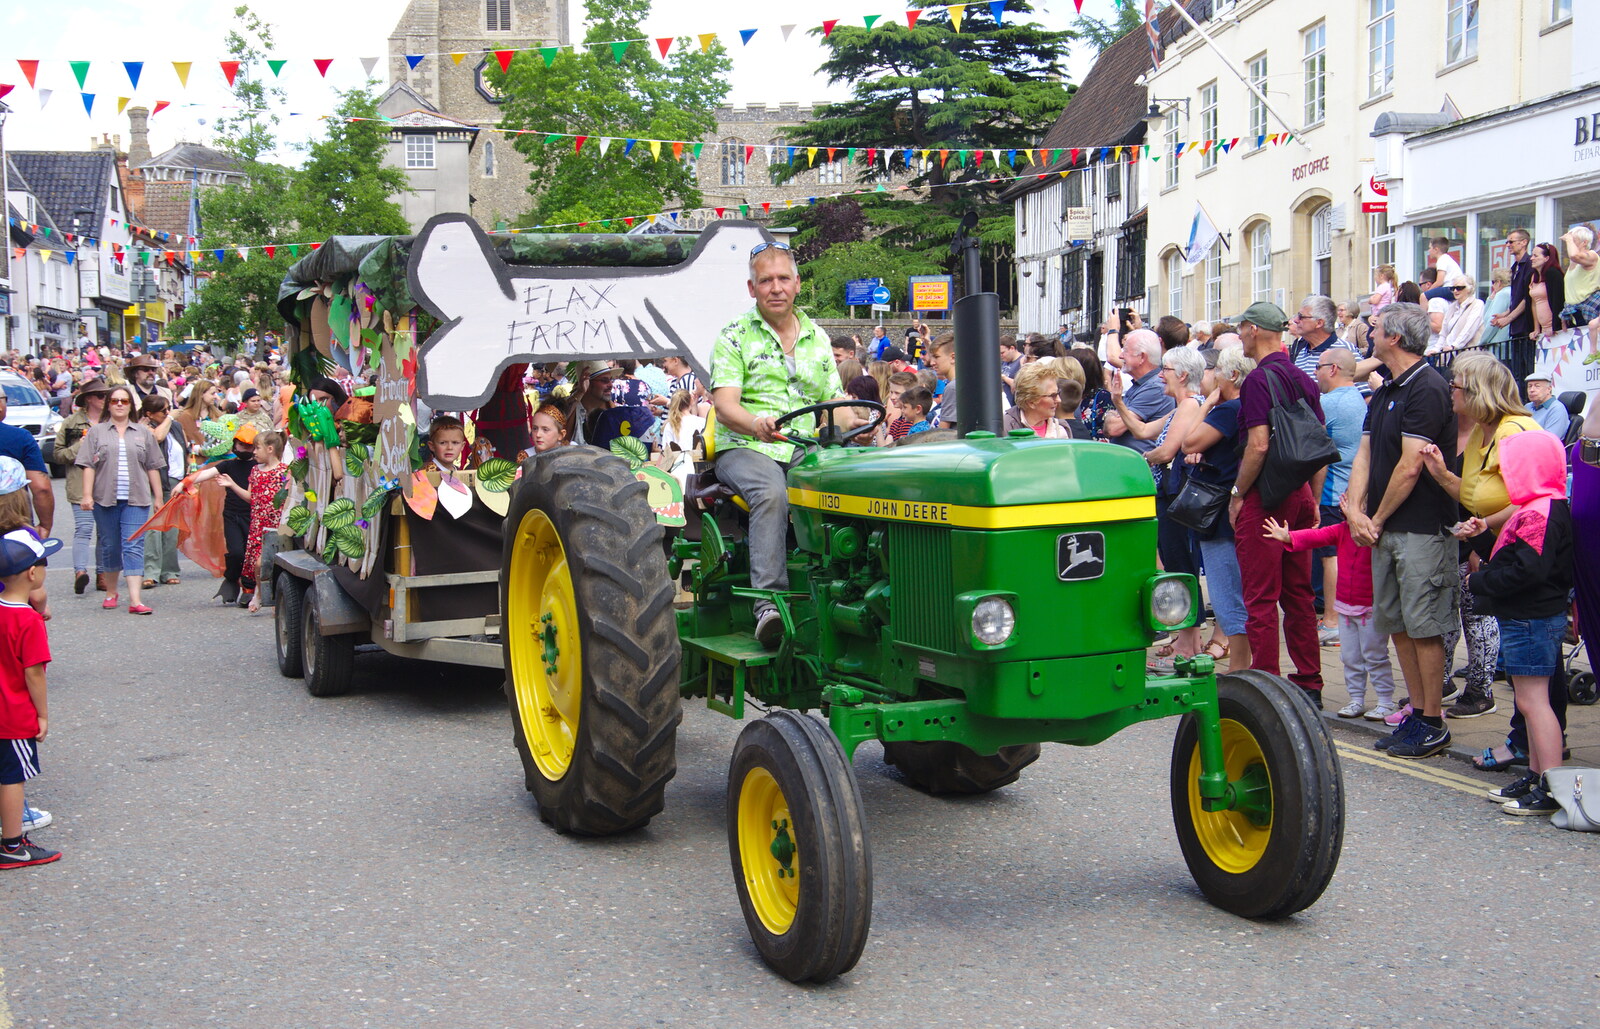 A John Deere tractor from Flax Farm trundles past from The Diss Carnival 2019, Diss, Norfolk - 9th June 2019